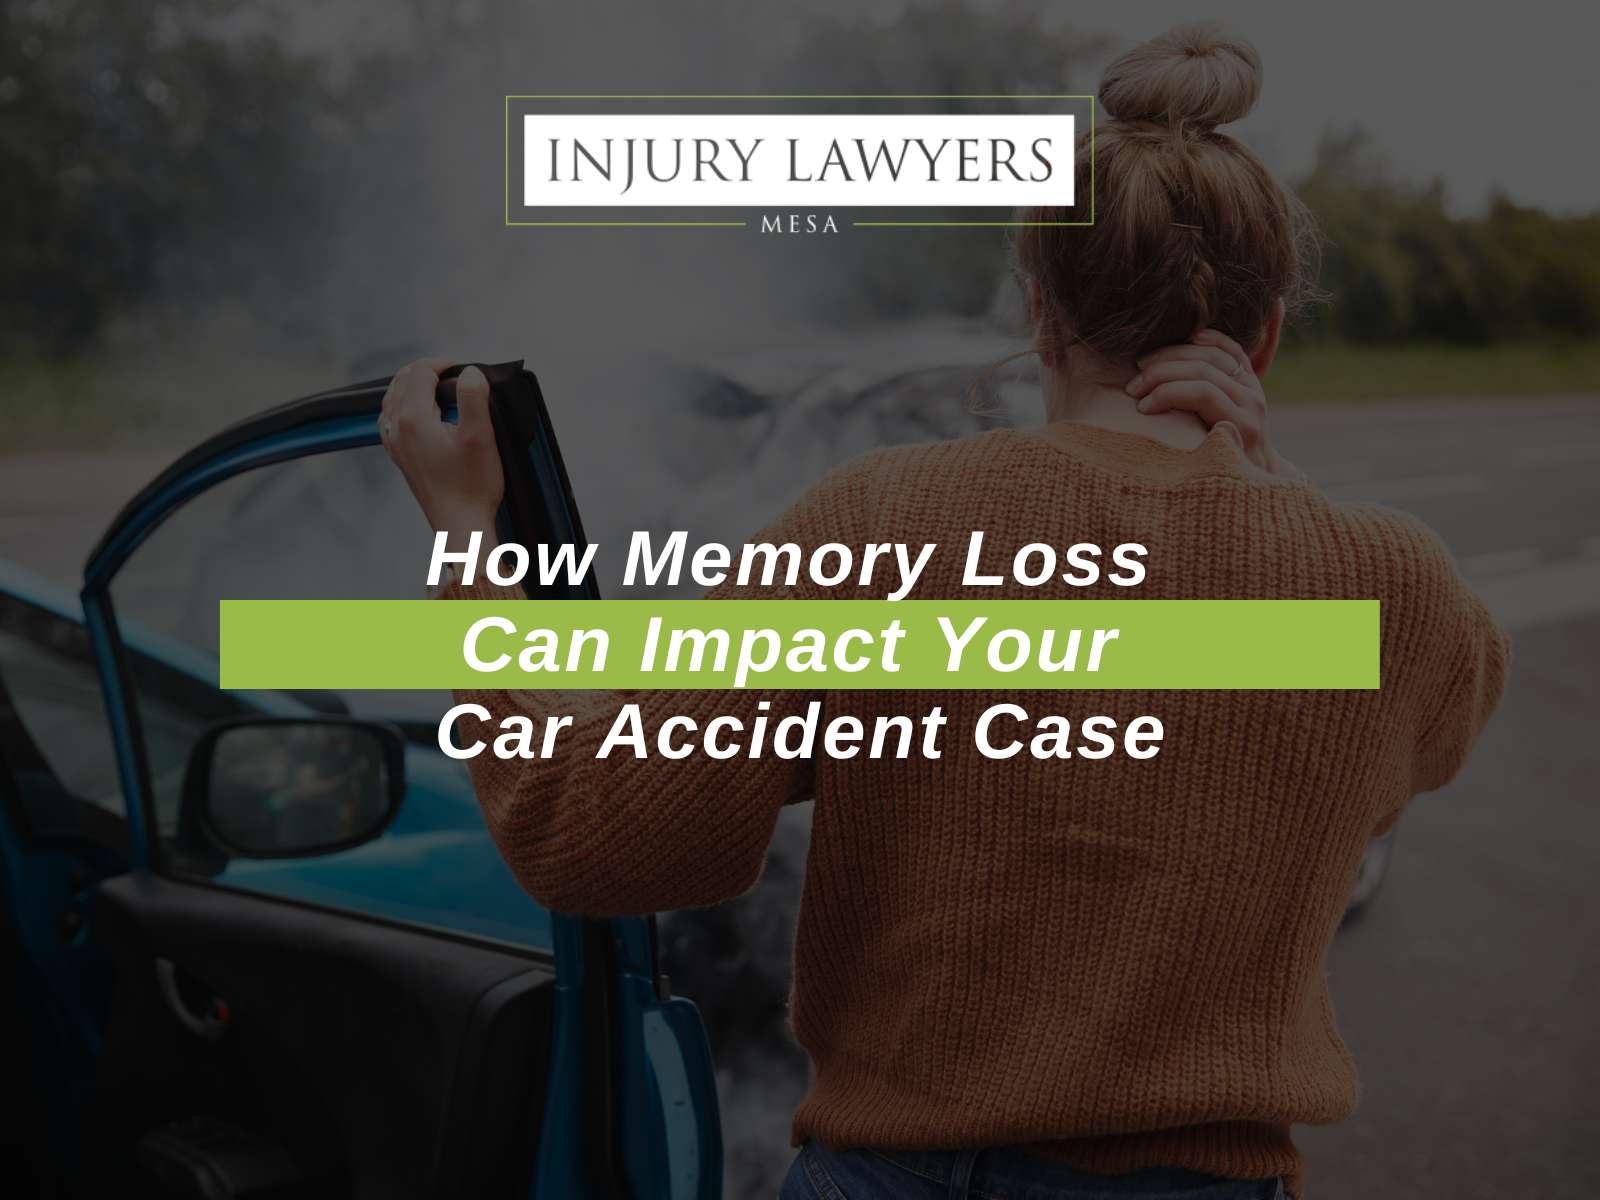 How Memory Loss Can Impact Your Car Accident Case